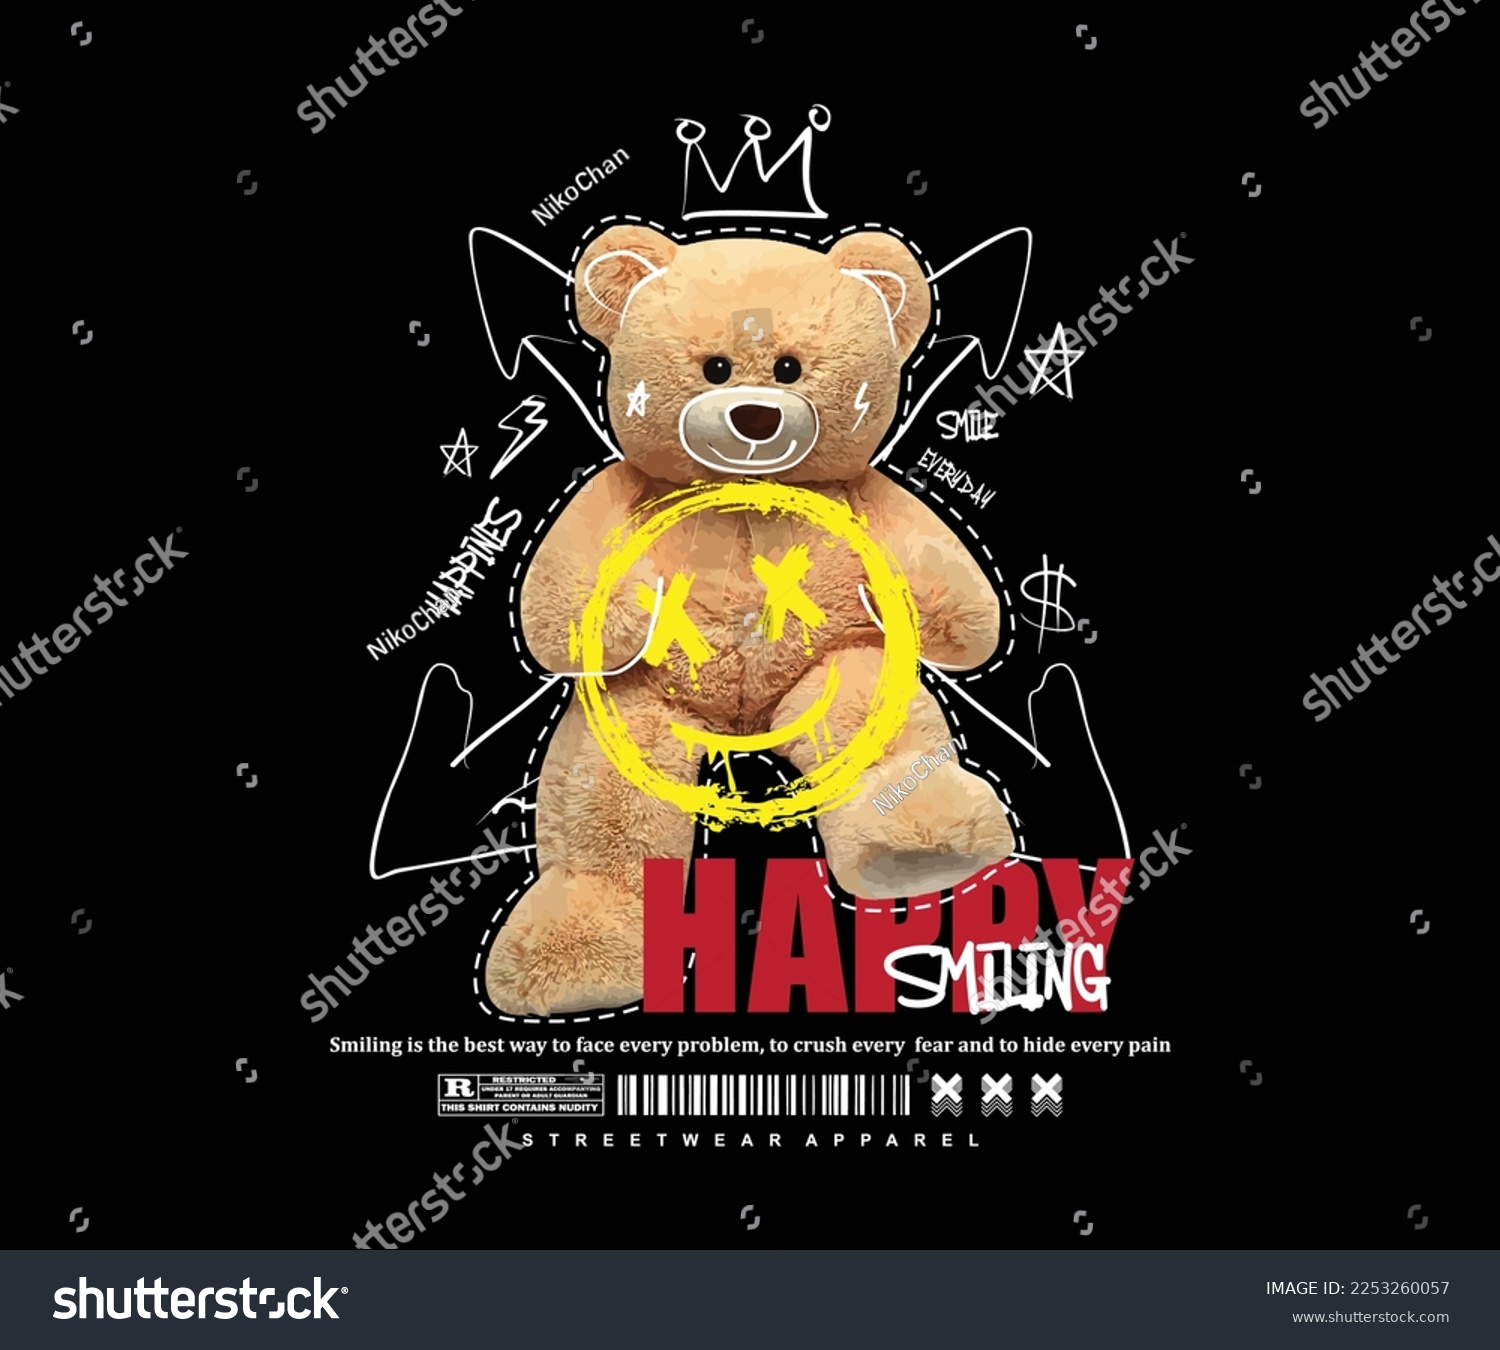 SVG of happy smiling slogan print design with teddy bear illustration in graffiti street art style for street wear and urban style t shirt, design, hoodie, etc. svg